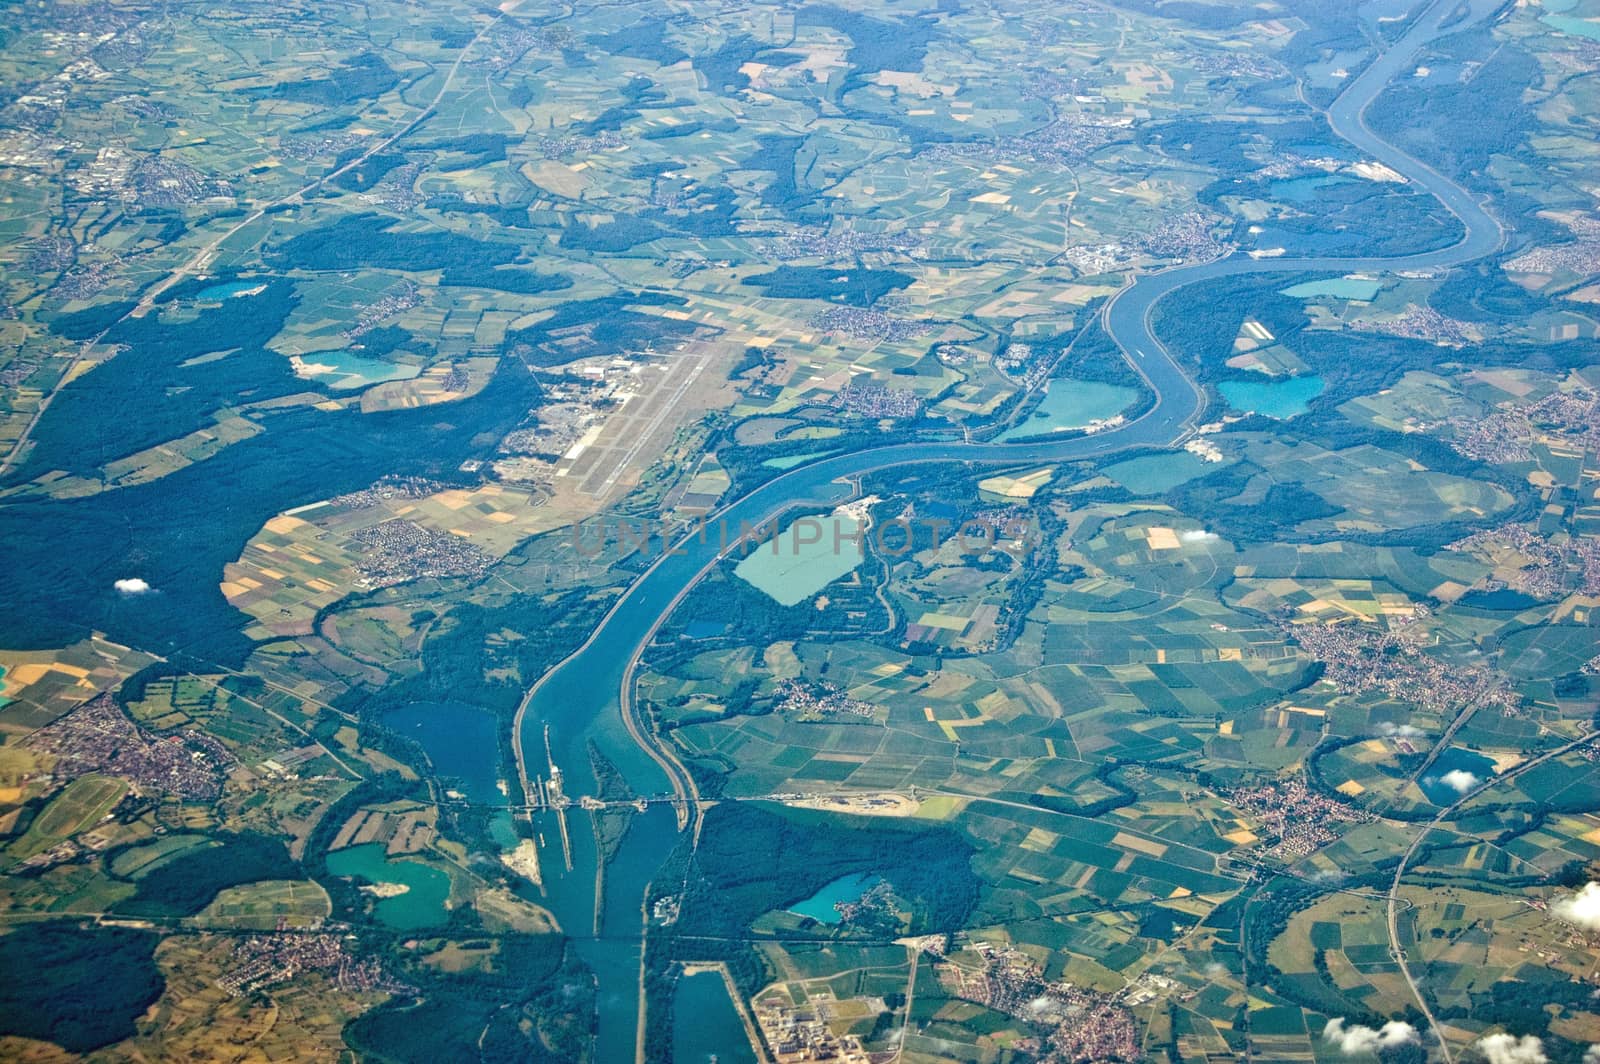 View from the air of the Iffezheim Barrage on the upper River Rhine. The barrage produces hydroelectricity. Beyond is Karlsruhe-Soellingen airport.